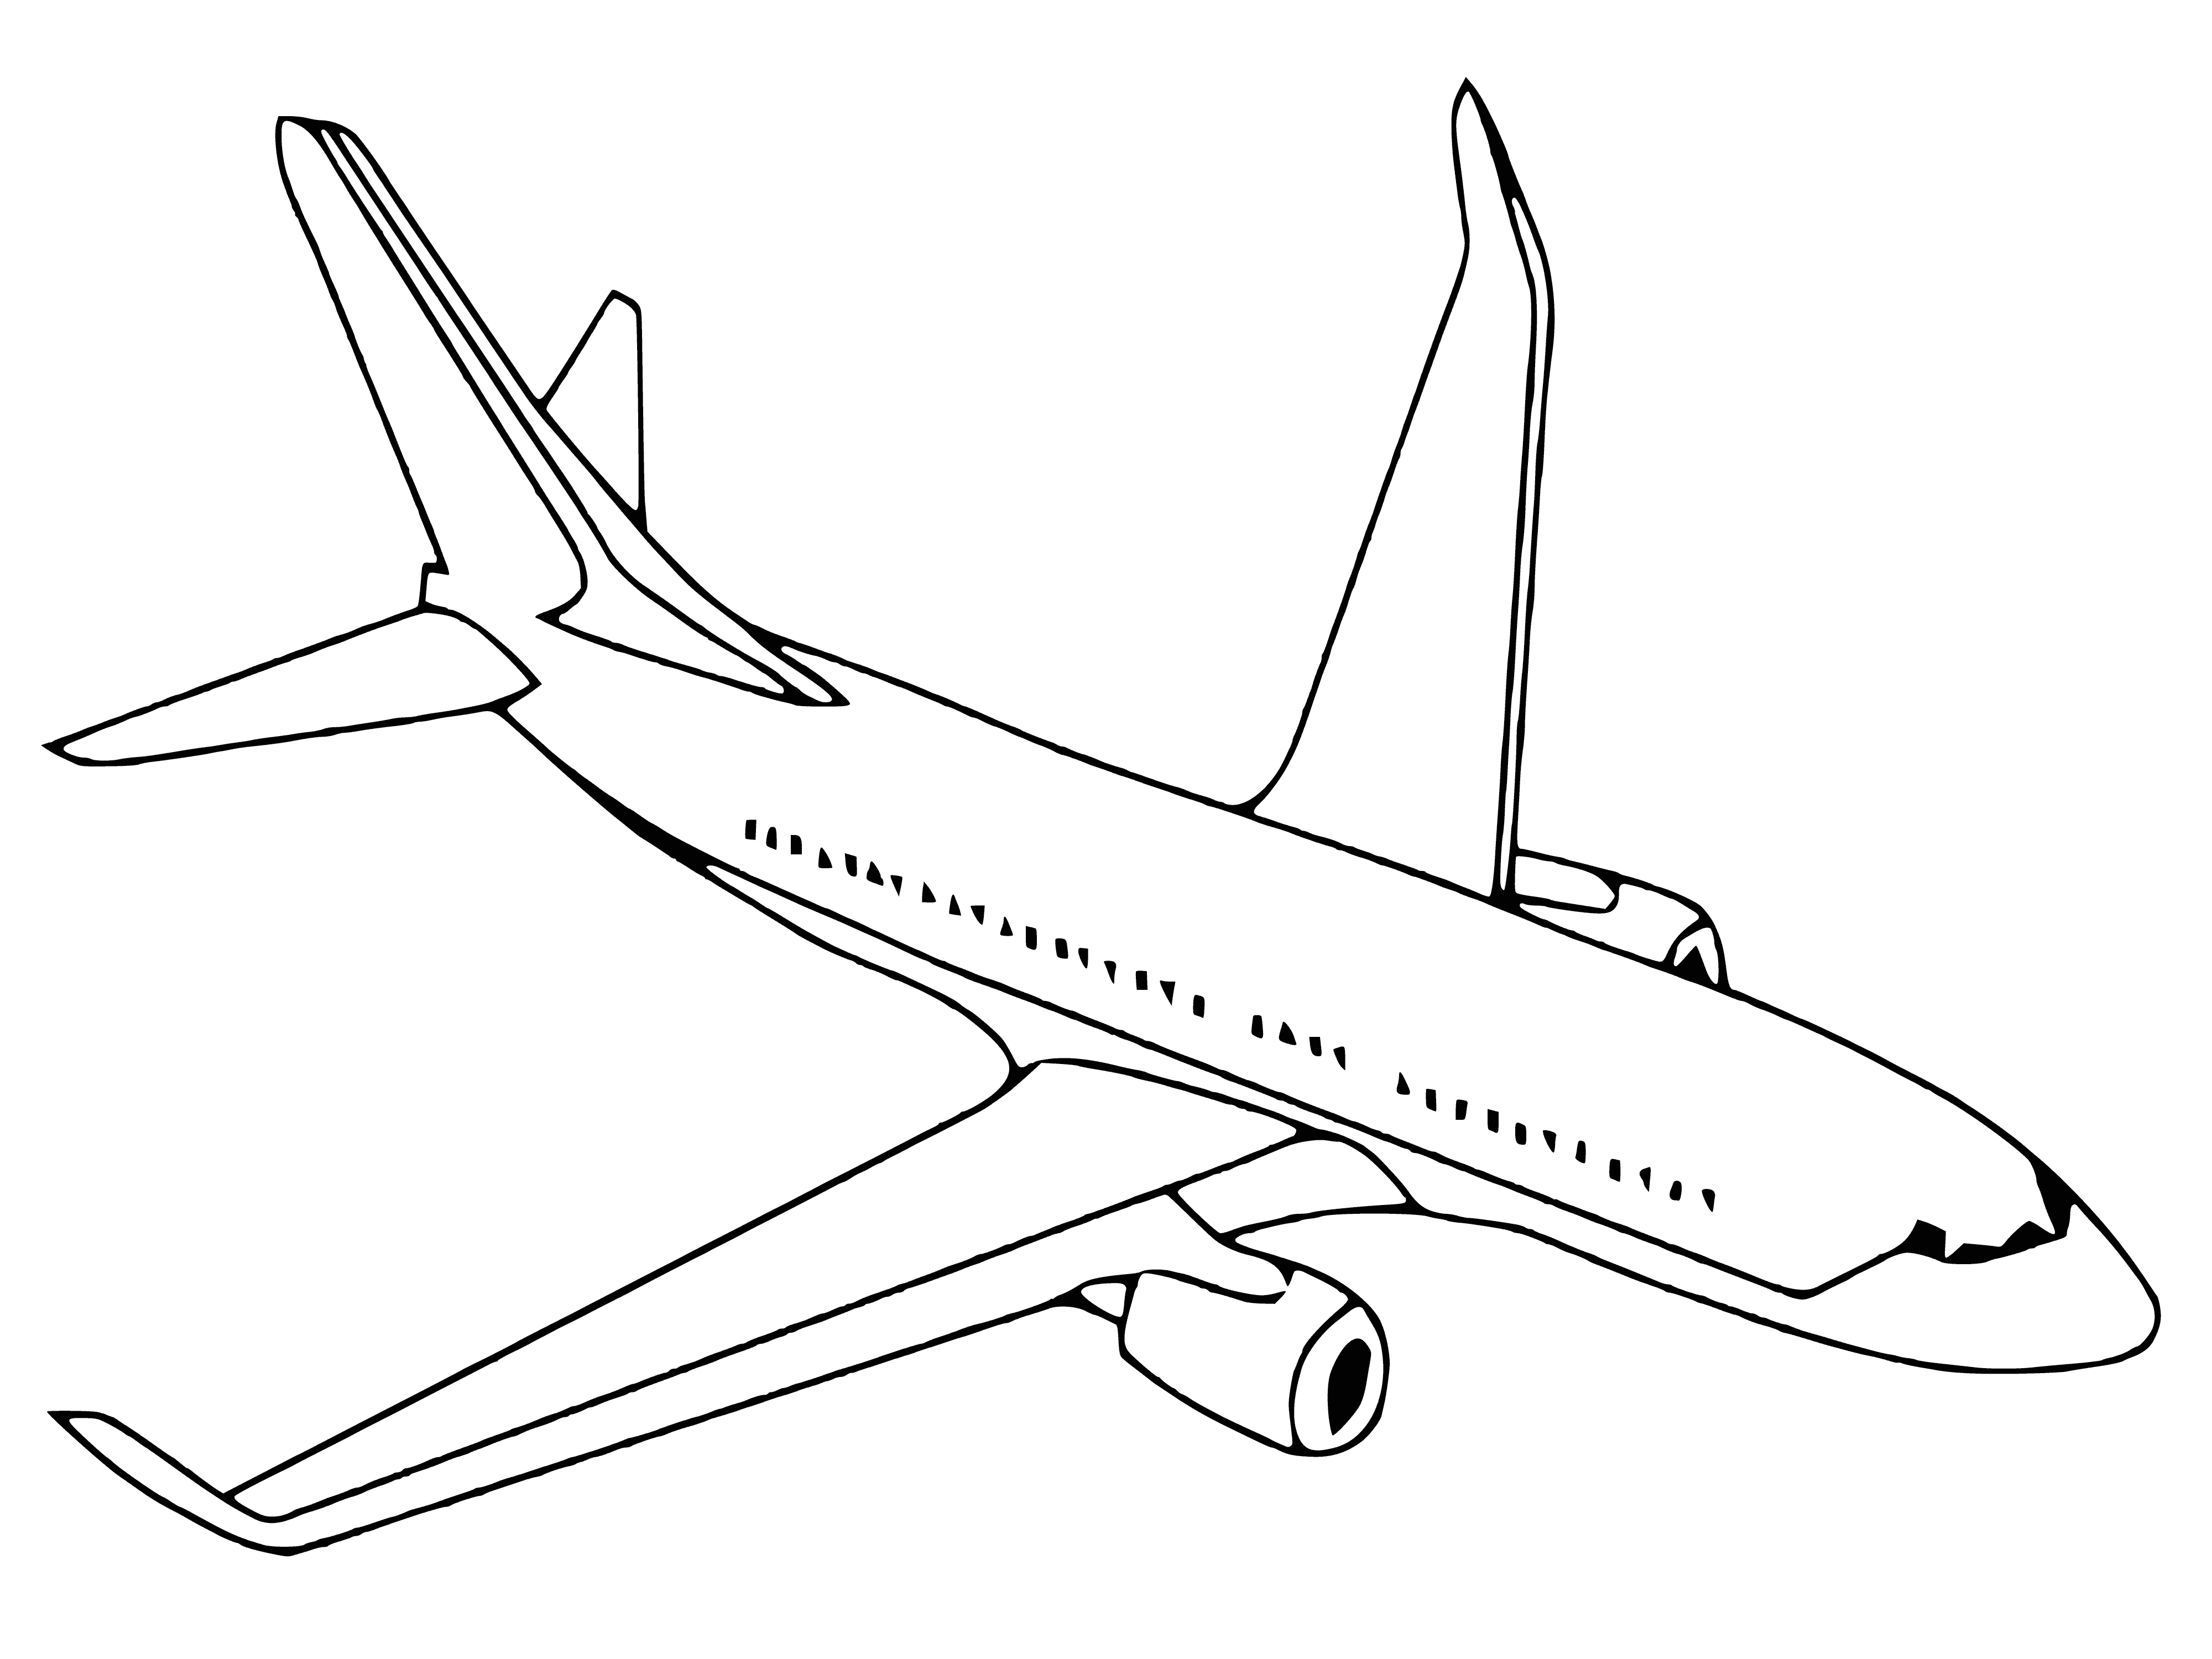 coloring page: Airplanes fly by propelling themselves forward, displacing air to generate lift for takeoff and flight. Wings Airplane uses engines, propellers & Jet Engines to push it forward, creating lift w/displaced air to take off &fly.